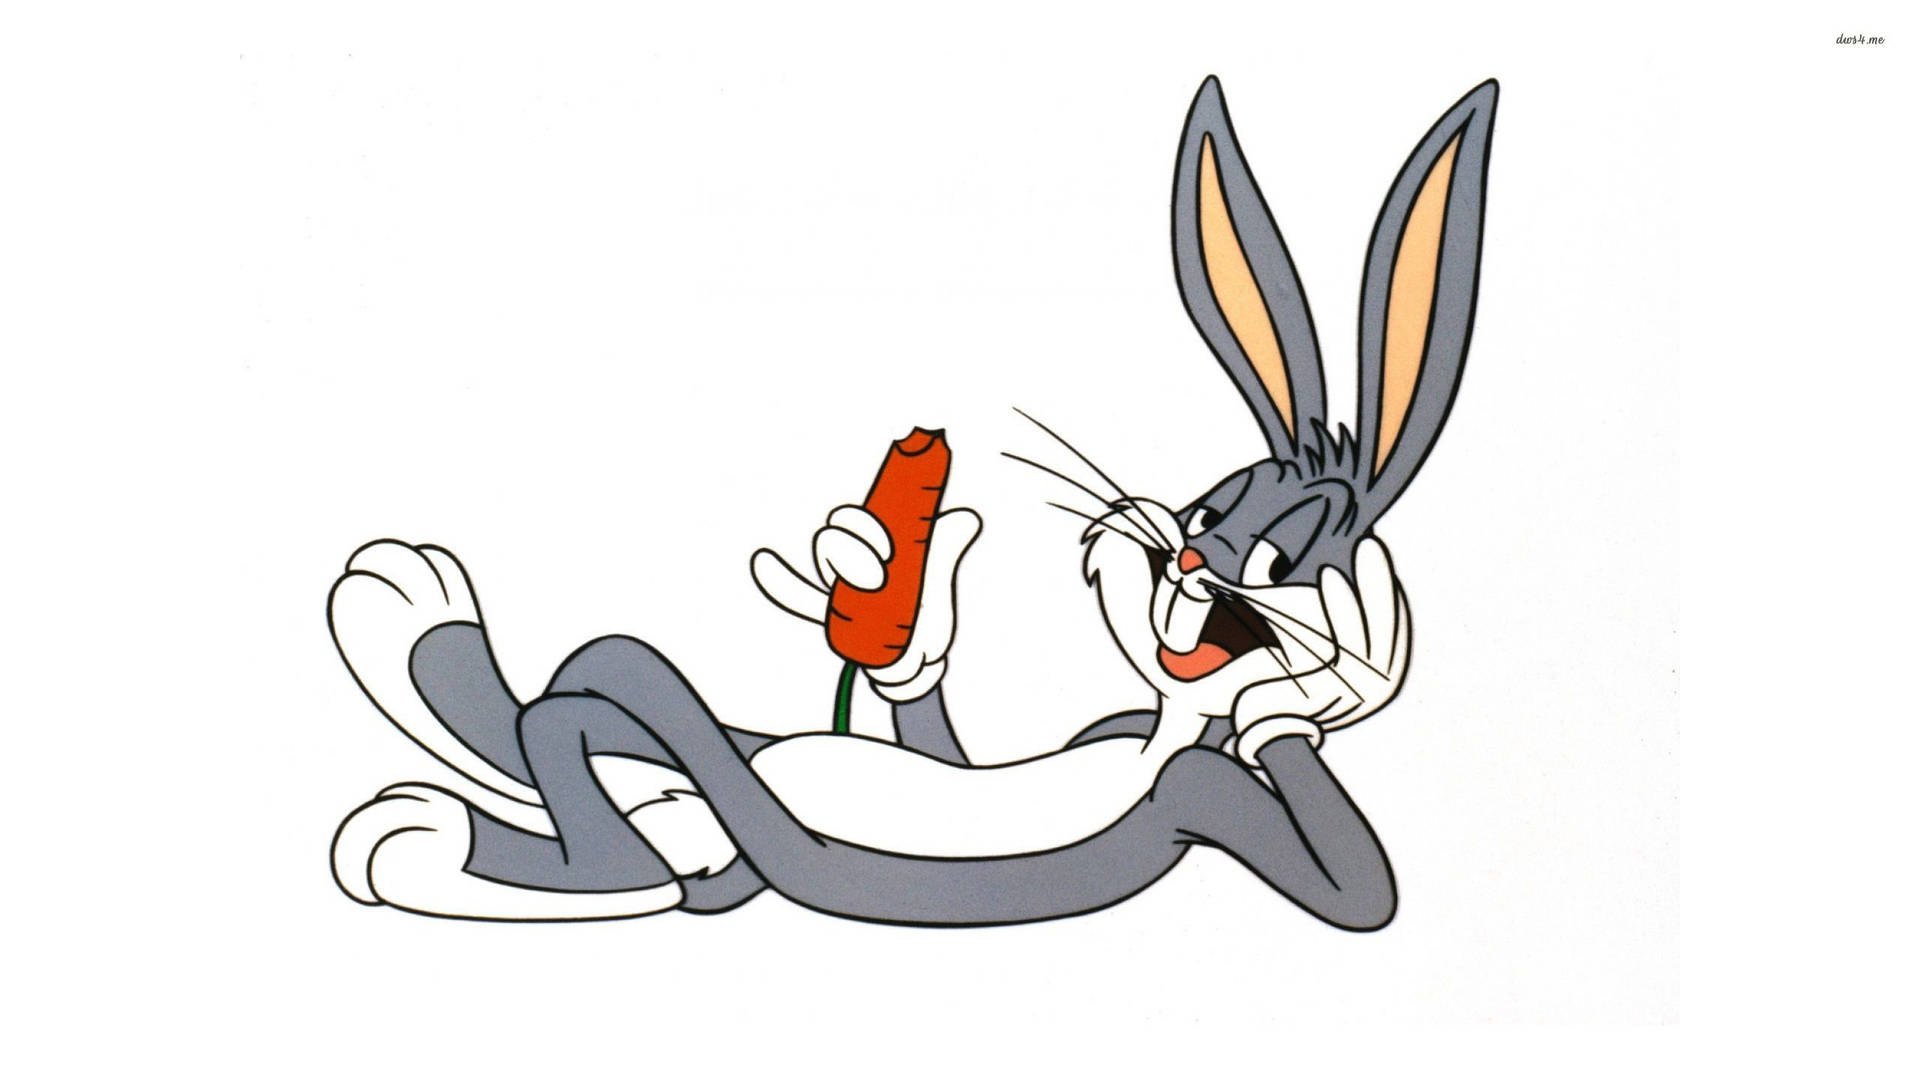 Bugs Bunny Holding Red Carrot Wallpaper